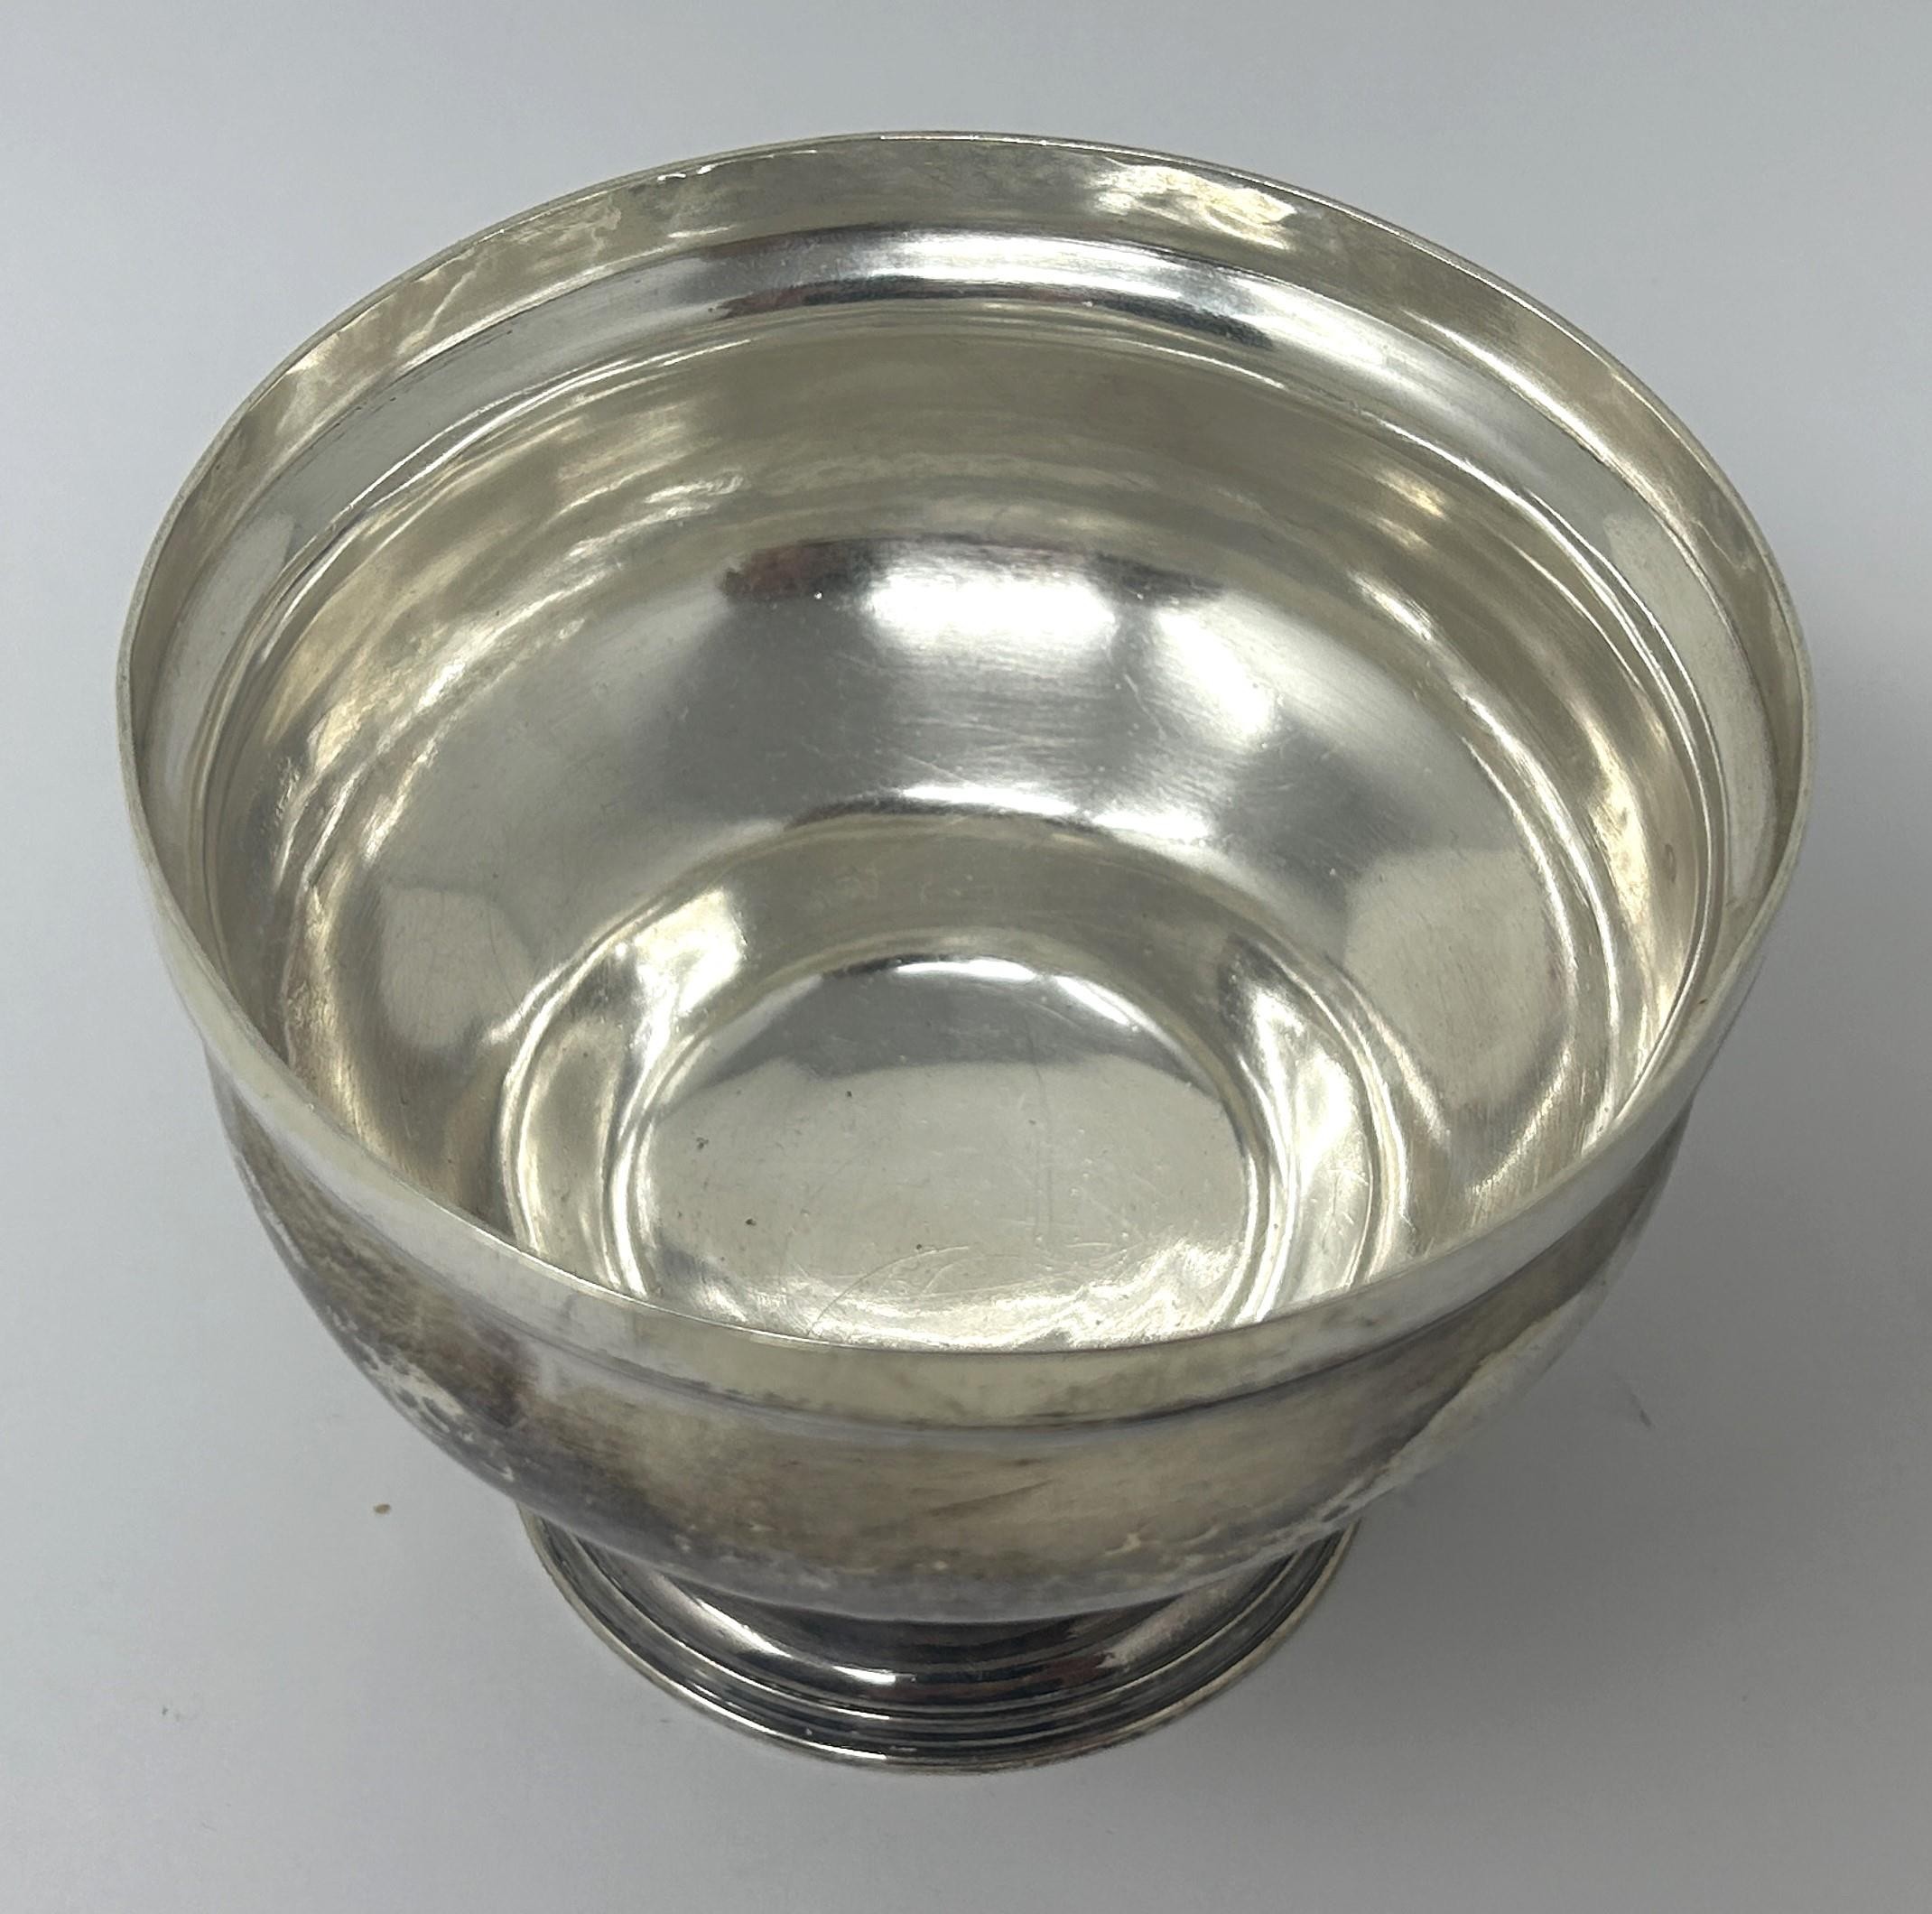 An 18th century silver pedestal bowl, marks rubbed, 6.7 ozt - Image 2 of 5